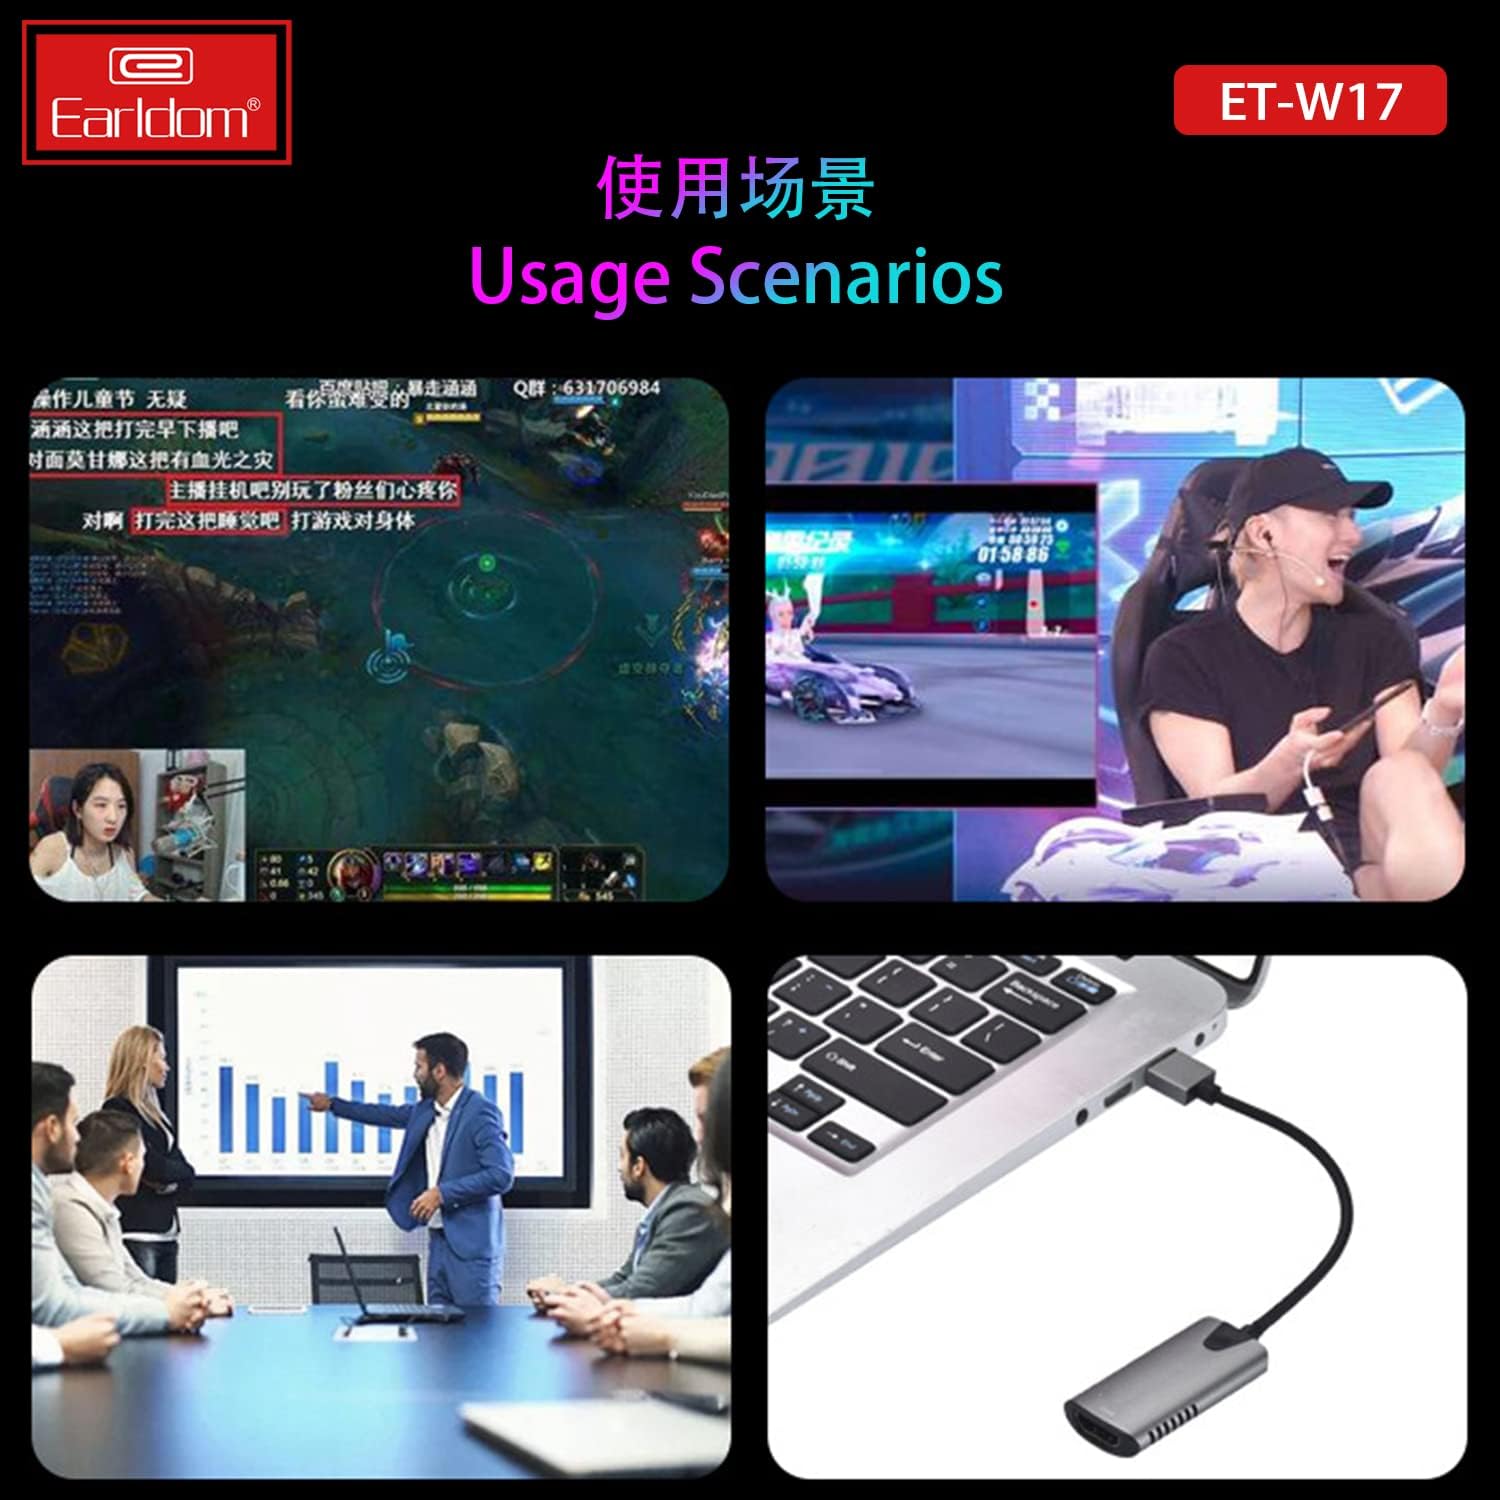 Video Capture Cards, 4K HDMI to USB 3.0 Video Capture Device, HDMI to USB Video Capturing Card